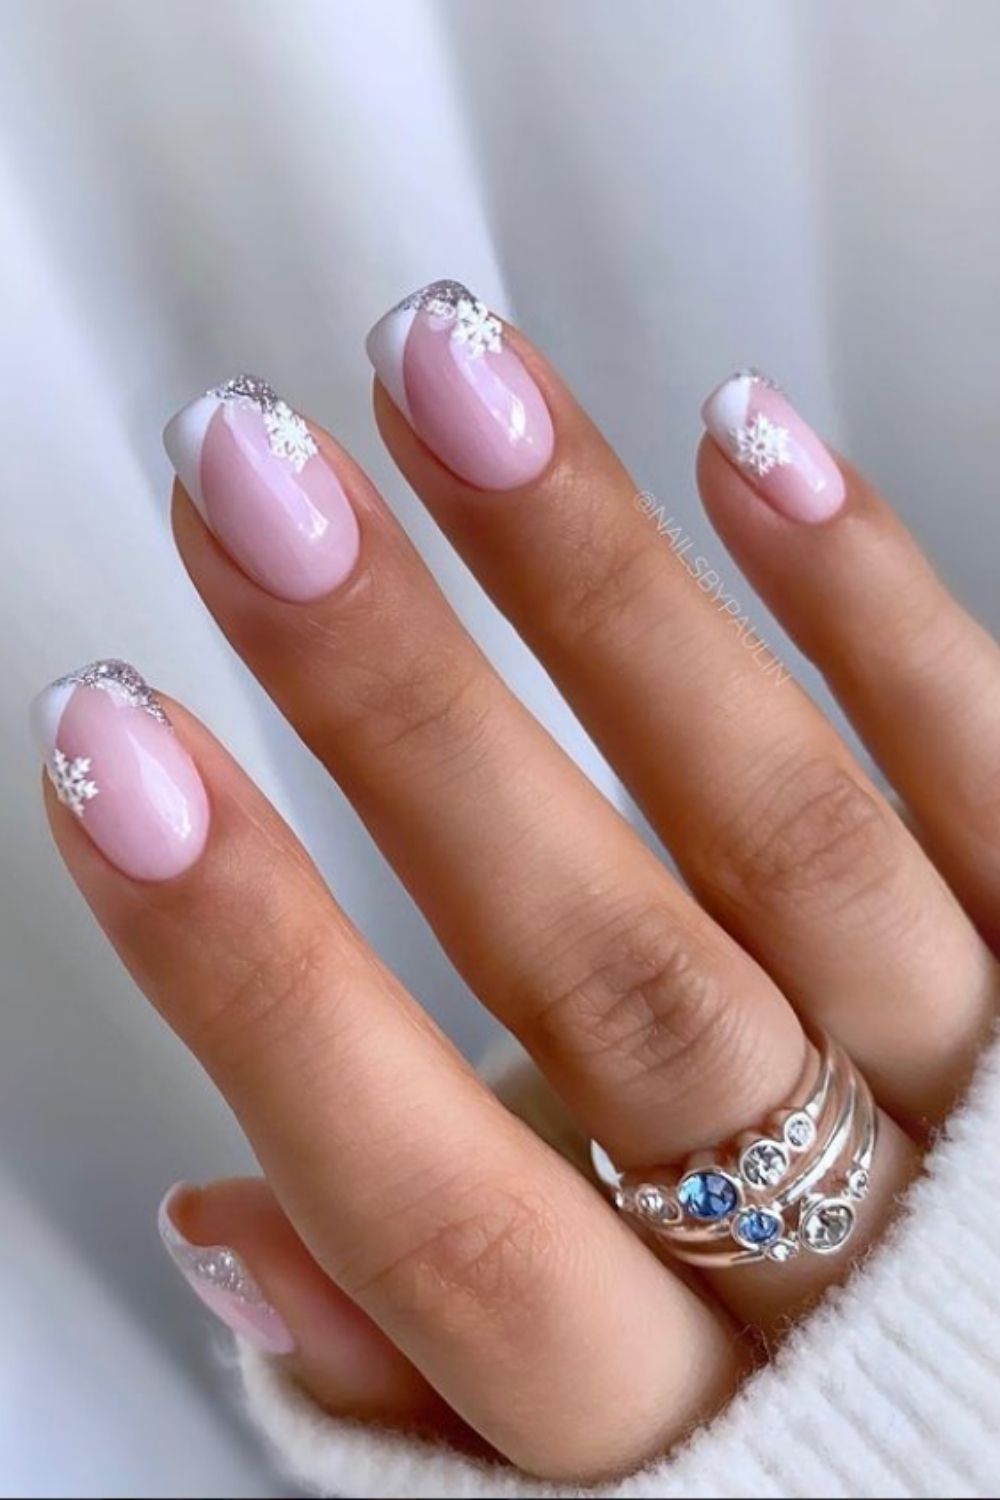 White tip french nails